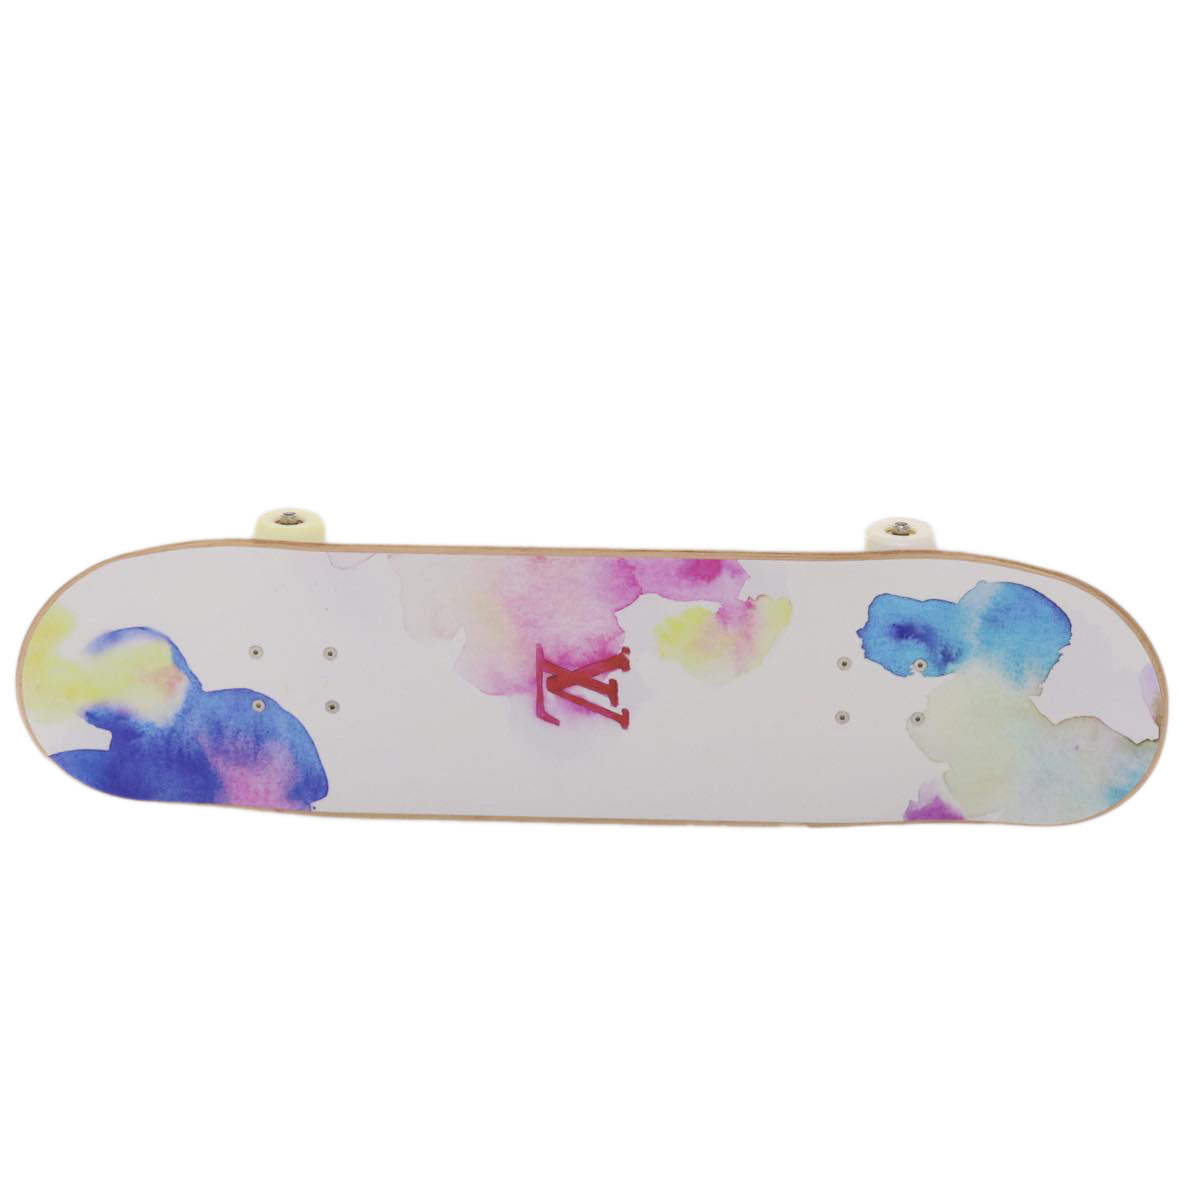 LOUIS VUITTON Monogram Water Color Skateboard Wood 22SS White GI0622 Auth 46805A